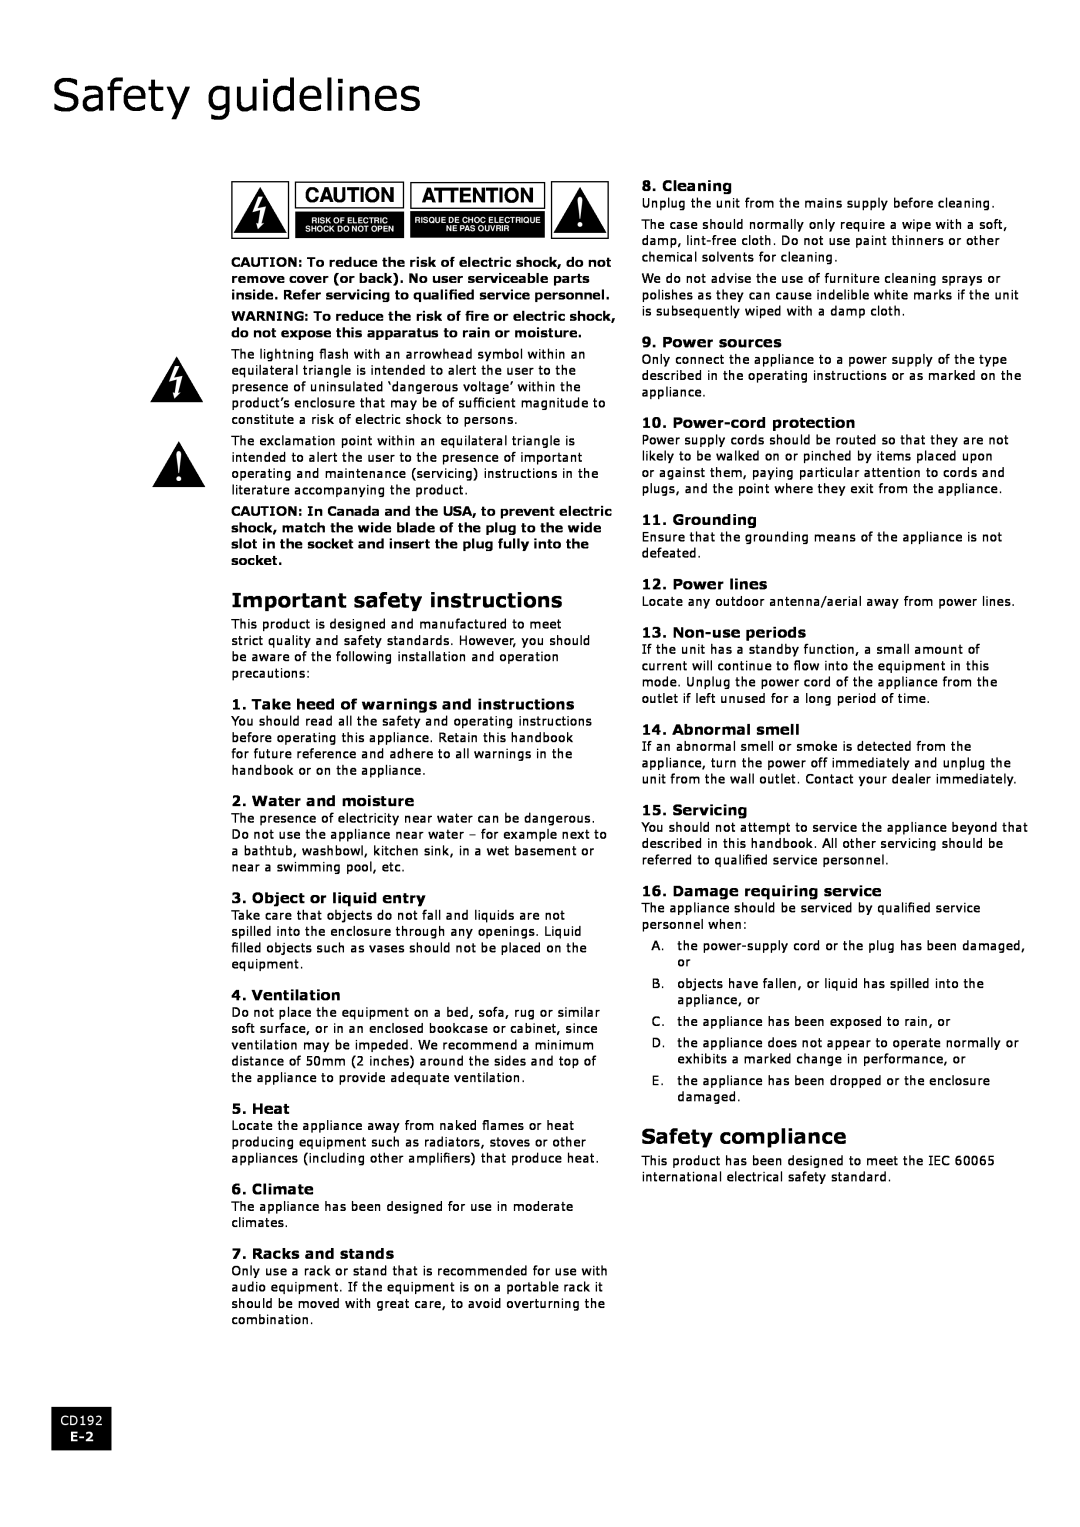 Arcam CD192 manual Safety guidelines, Important safety instructions, Safety compliance 